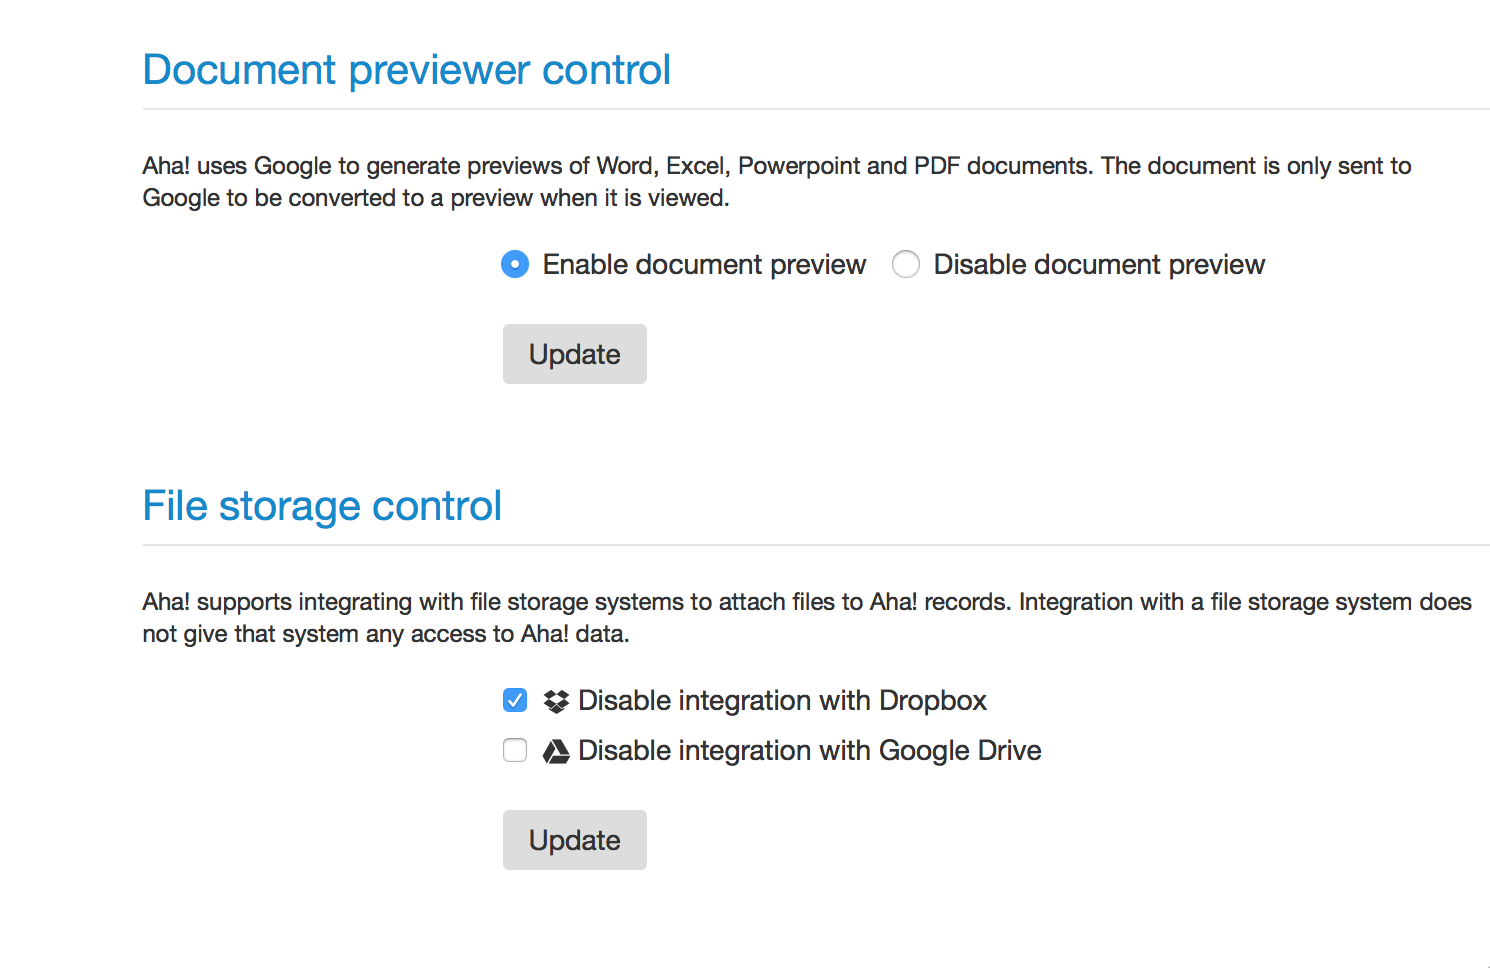 Blog - Just Launched! — Enhanced Google Drive and Dropbox Integrations - inline image